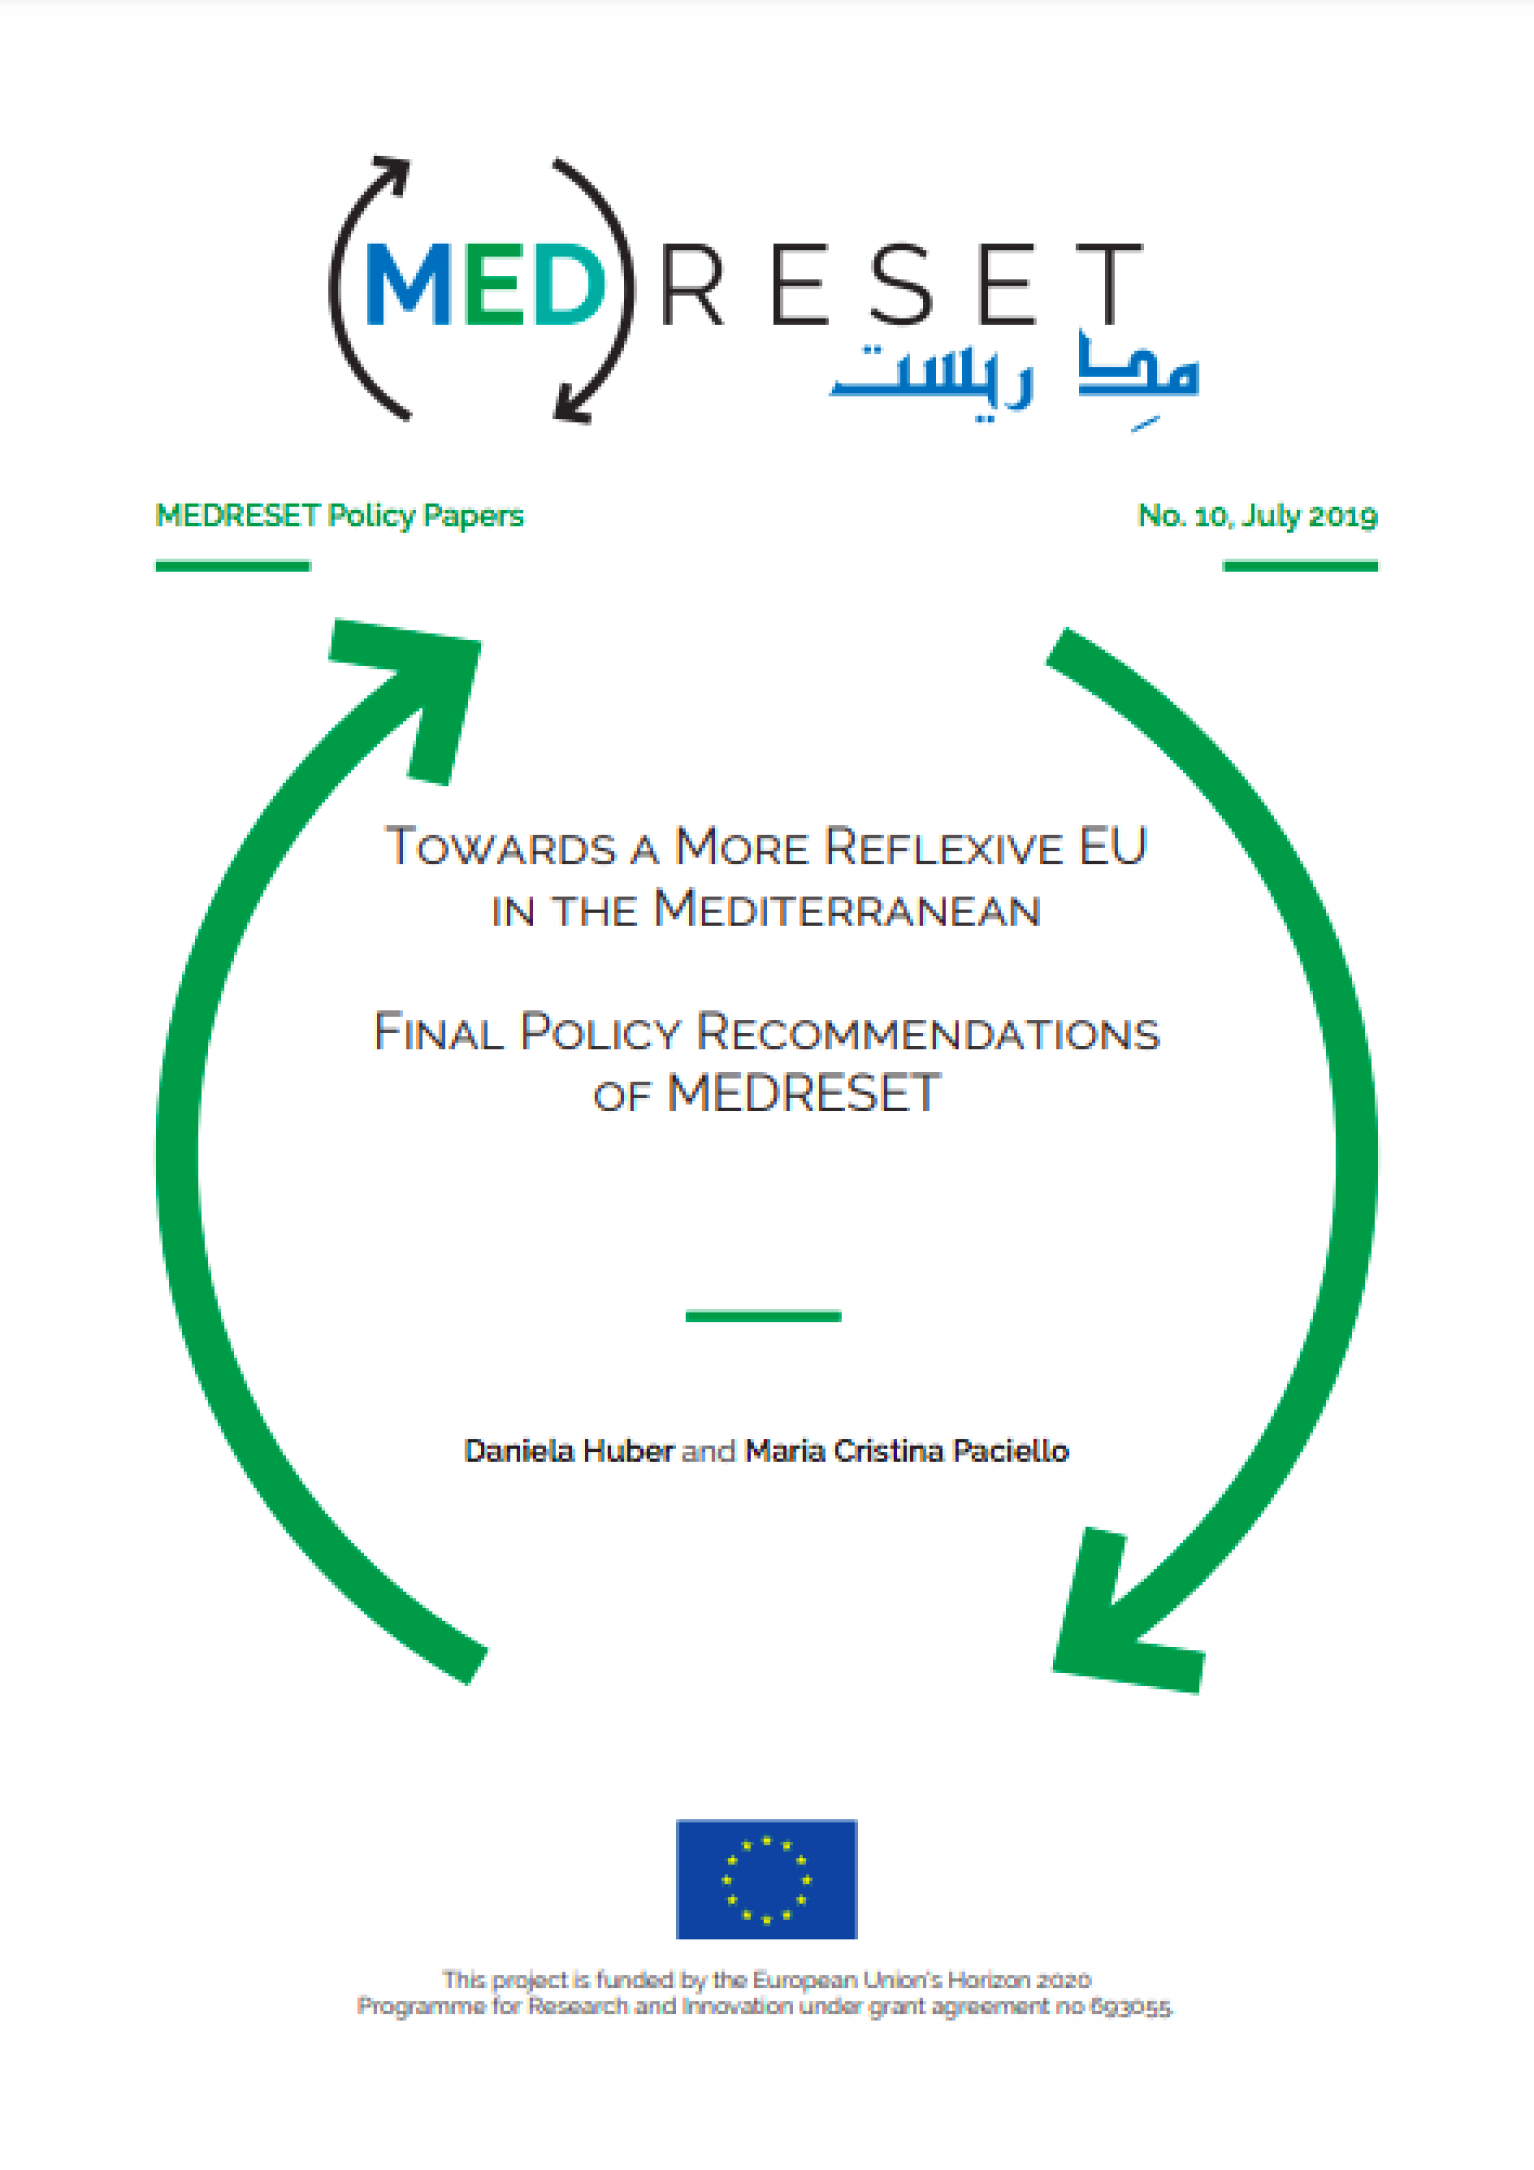 New policy recommendation of MEDRESET: “Towards a More Reflexive EU in the Mediterranean”